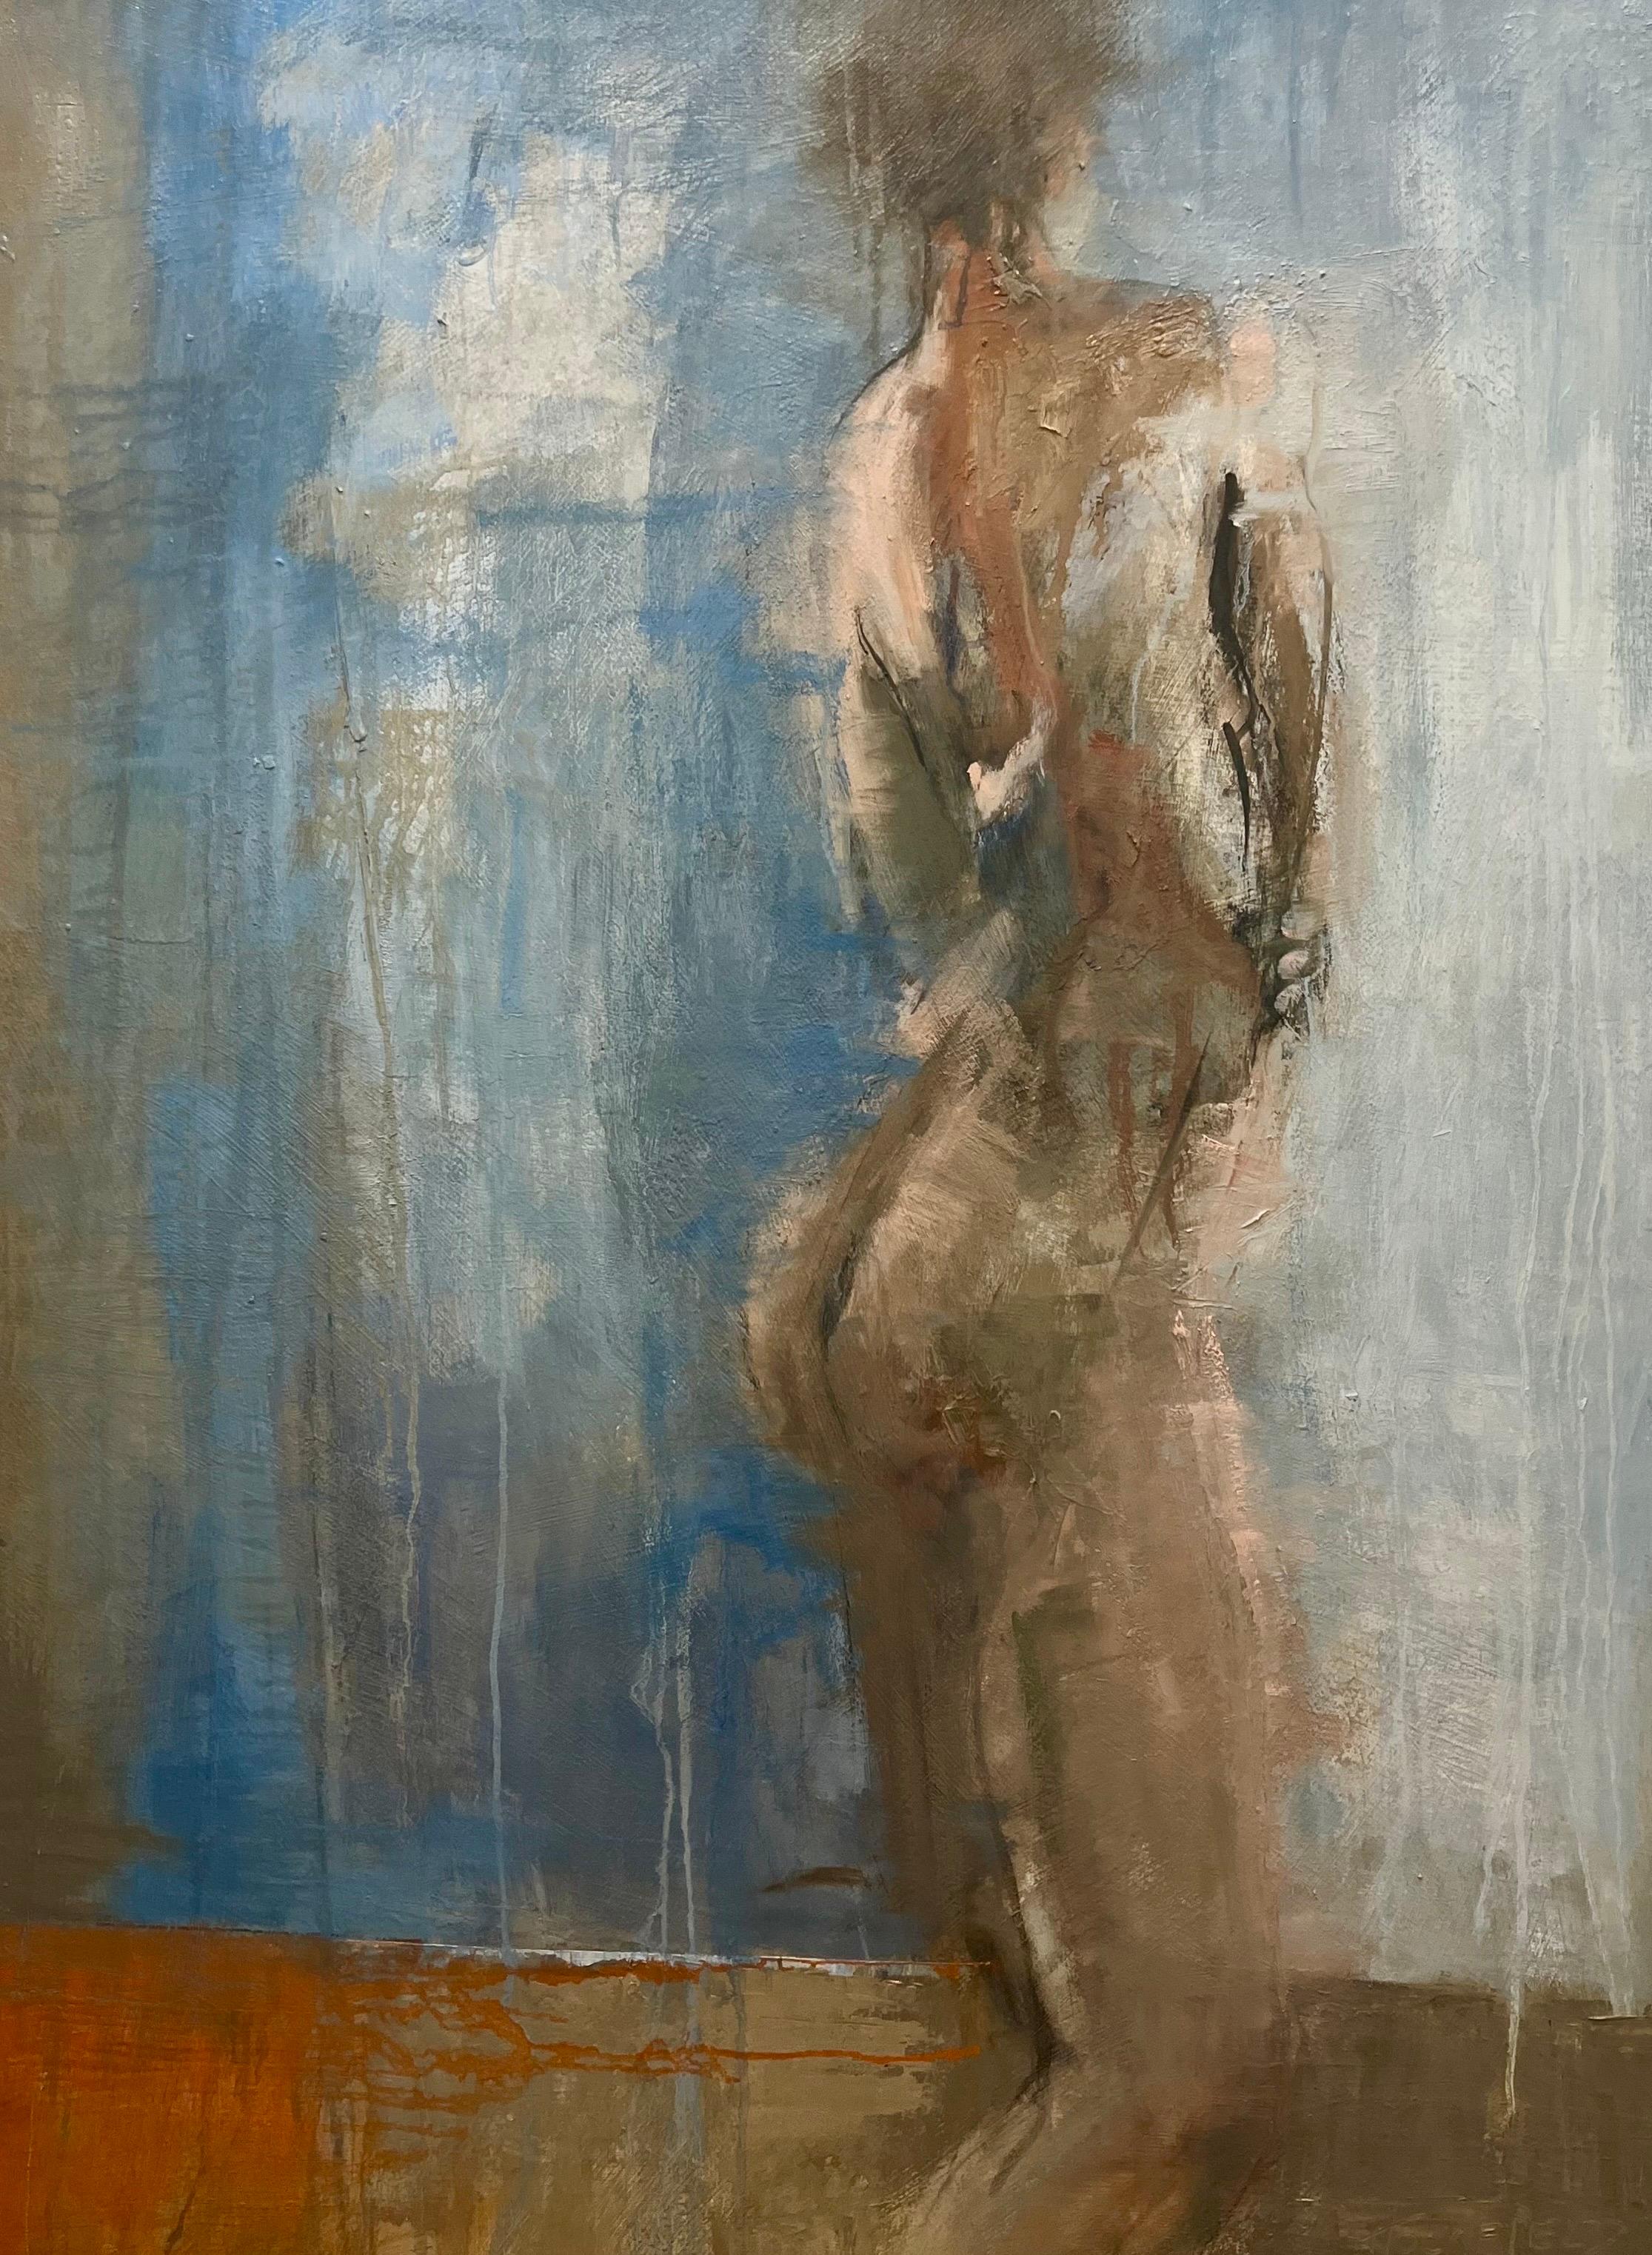 Look Out by Sharon Hockfield, Contemporary Nude Painting Oil on Canvas